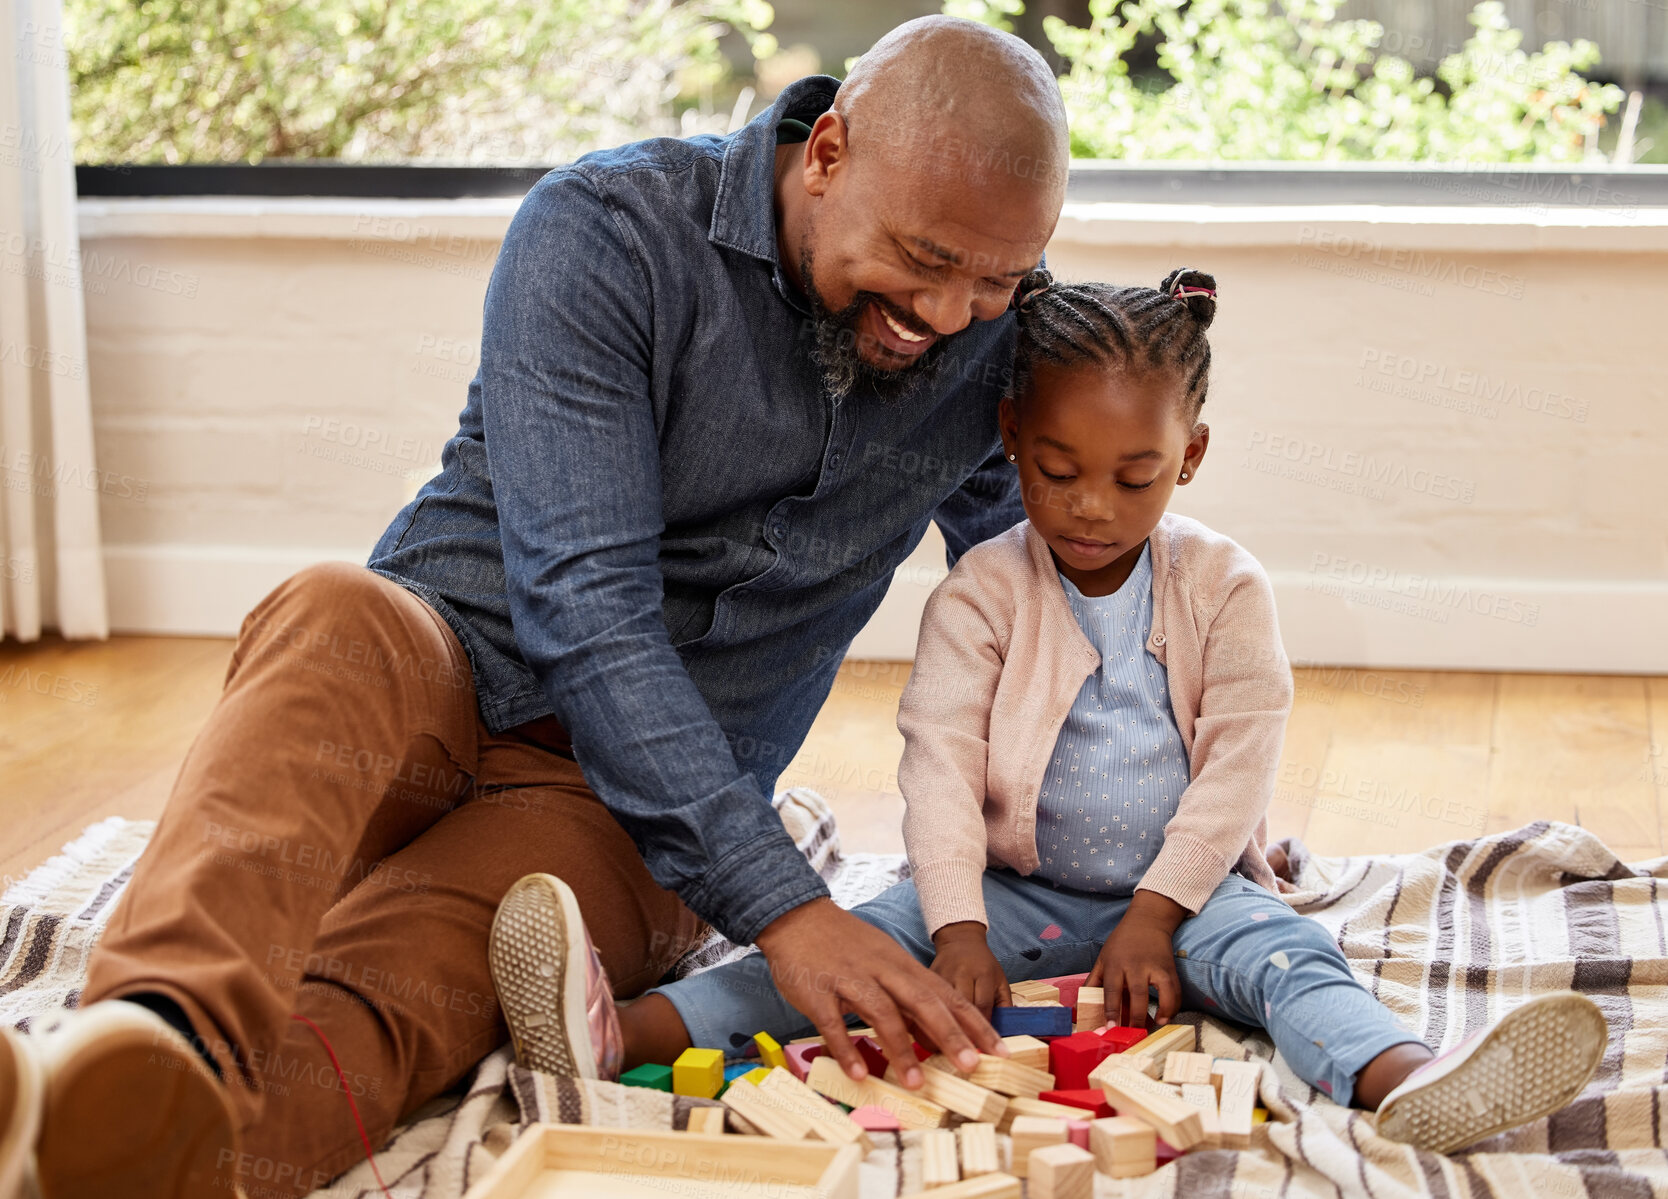 Buy stock photo Shot of s little girl plsying with blocks with her grandpa at home